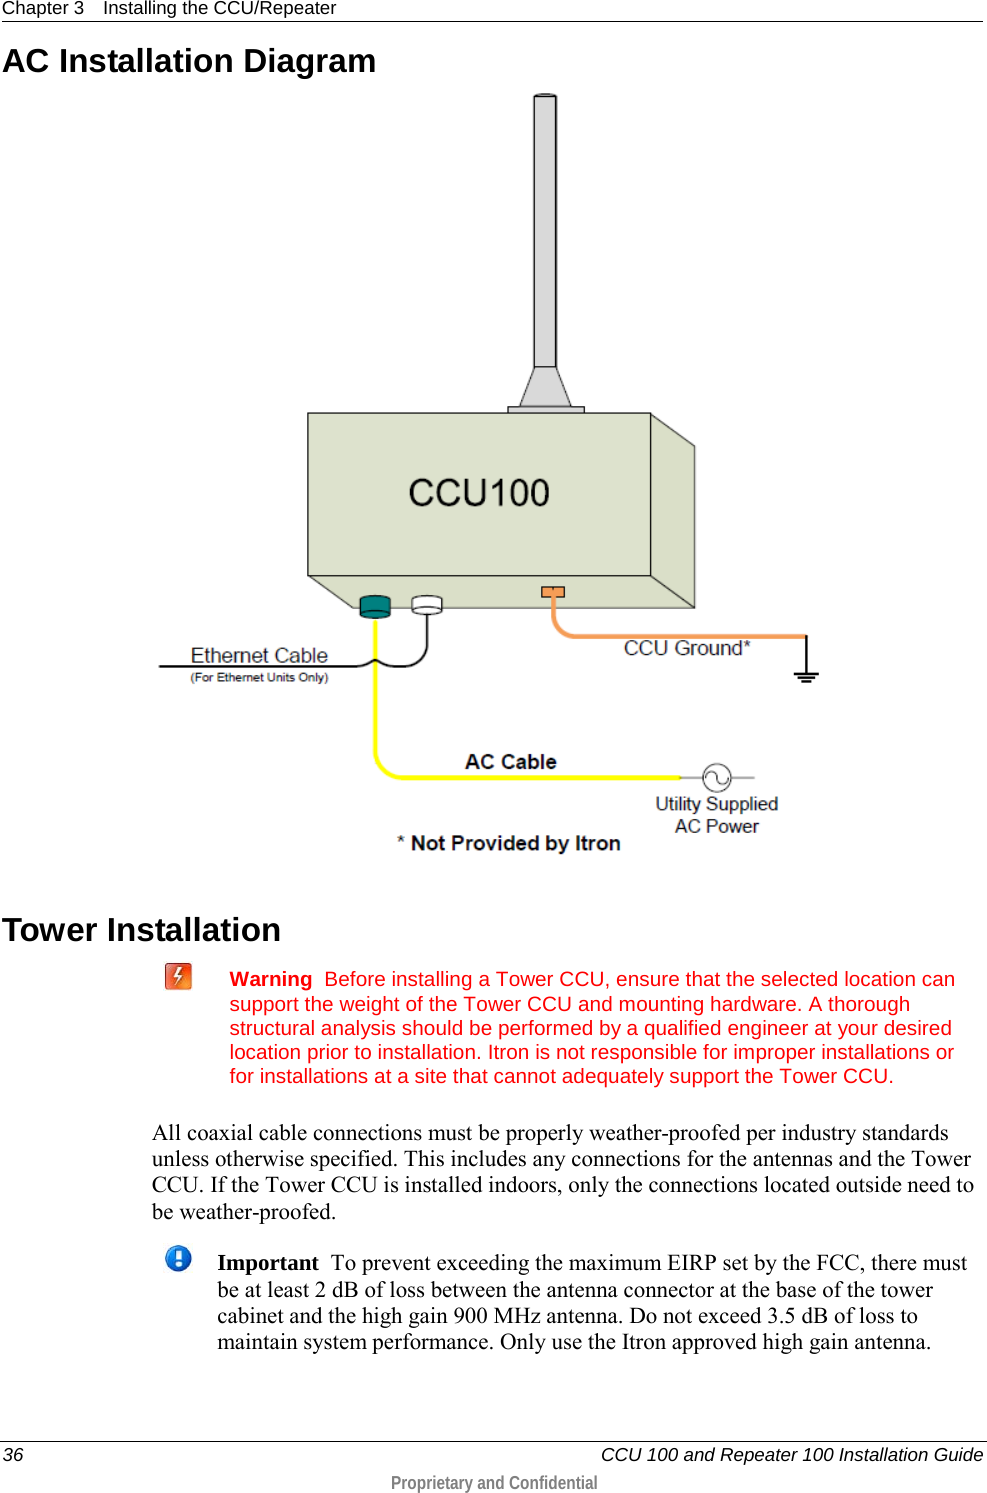 Chapter 3 Installing the CCU/Repeater  36   CCU 100 and Repeater 100 Installation Guide  Proprietary and Confidential  AC Installation Diagram   Tower Installation   Warning  Before installing a Tower CCU, ensure that the selected location can support the weight of the Tower CCU and mounting hardware. A thorough structural analysis should be performed by a qualified engineer at your desired location prior to installation. Itron is not responsible for improper installations or for installations at a site that cannot adequately support the Tower CCU.   All coaxial cable connections must be properly weather-proofed per industry standards unless otherwise specified. This includes any connections for the antennas and the Tower CCU. If the Tower CCU is installed indoors, only the connections located outside need to be weather-proofed.   Important  To prevent exceeding the maximum EIRP set by the FCC, there must be at least 2 dB of loss between the antenna connector at the base of the tower cabinet and the high gain 900 MHz antenna. Do not exceed 3.5 dB of loss to maintain system performance. Only use the Itron approved high gain antenna. 